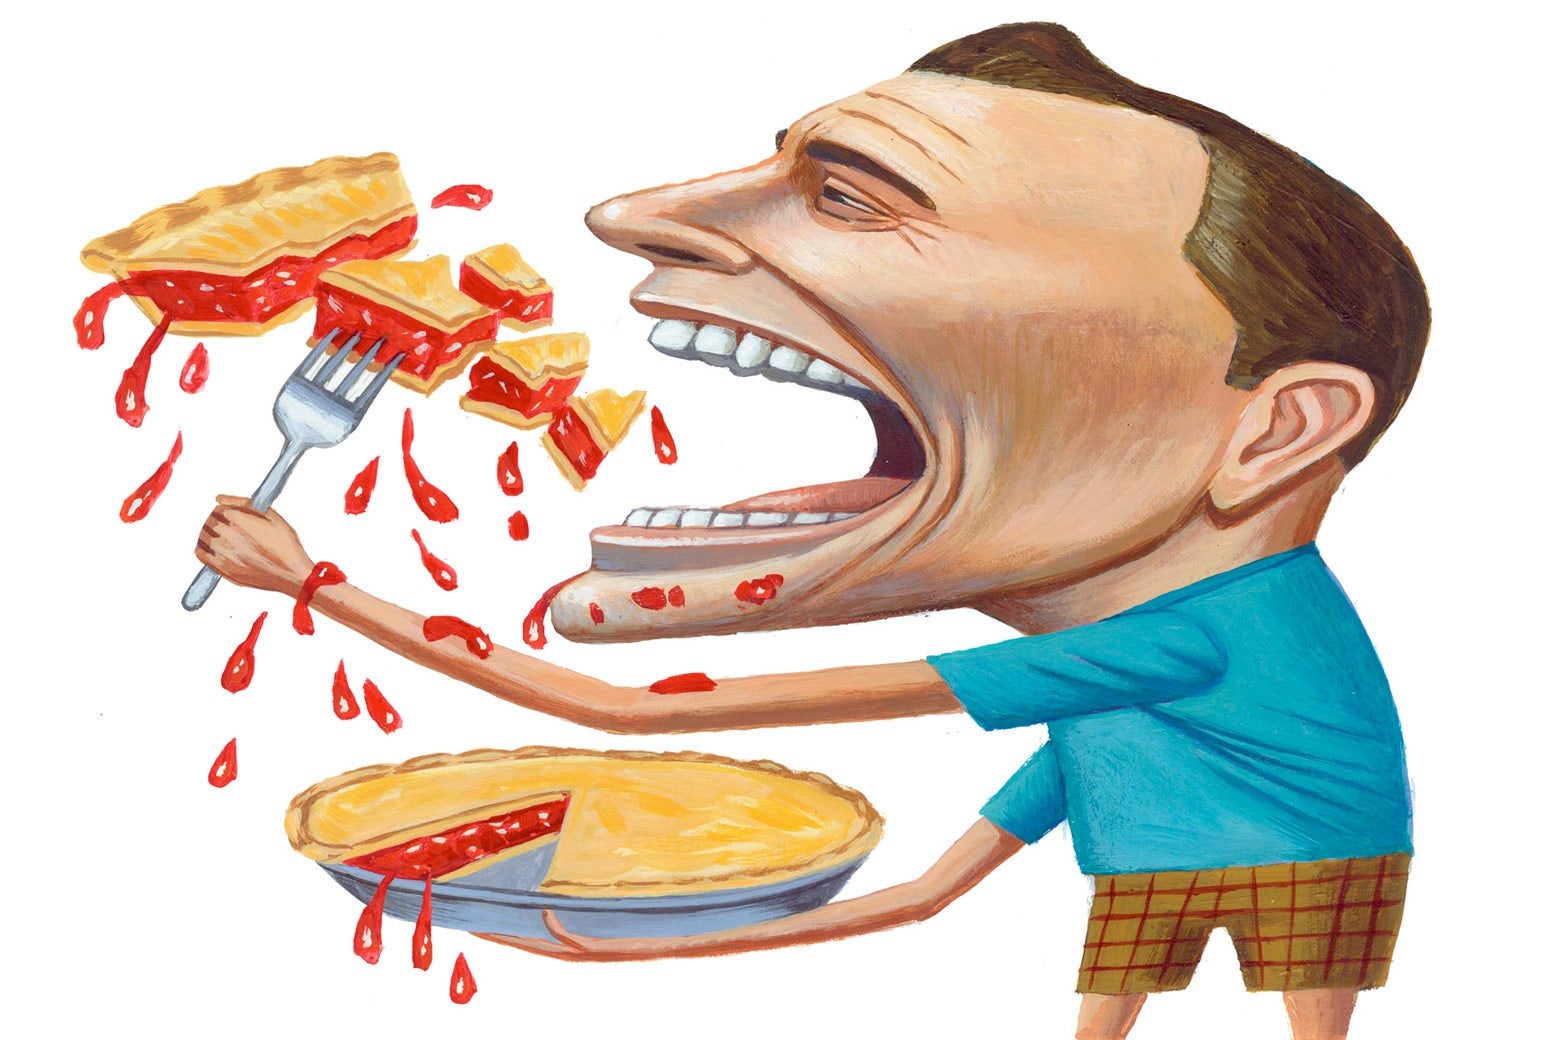 Illustration of a man sloppily eating a cherry pie.